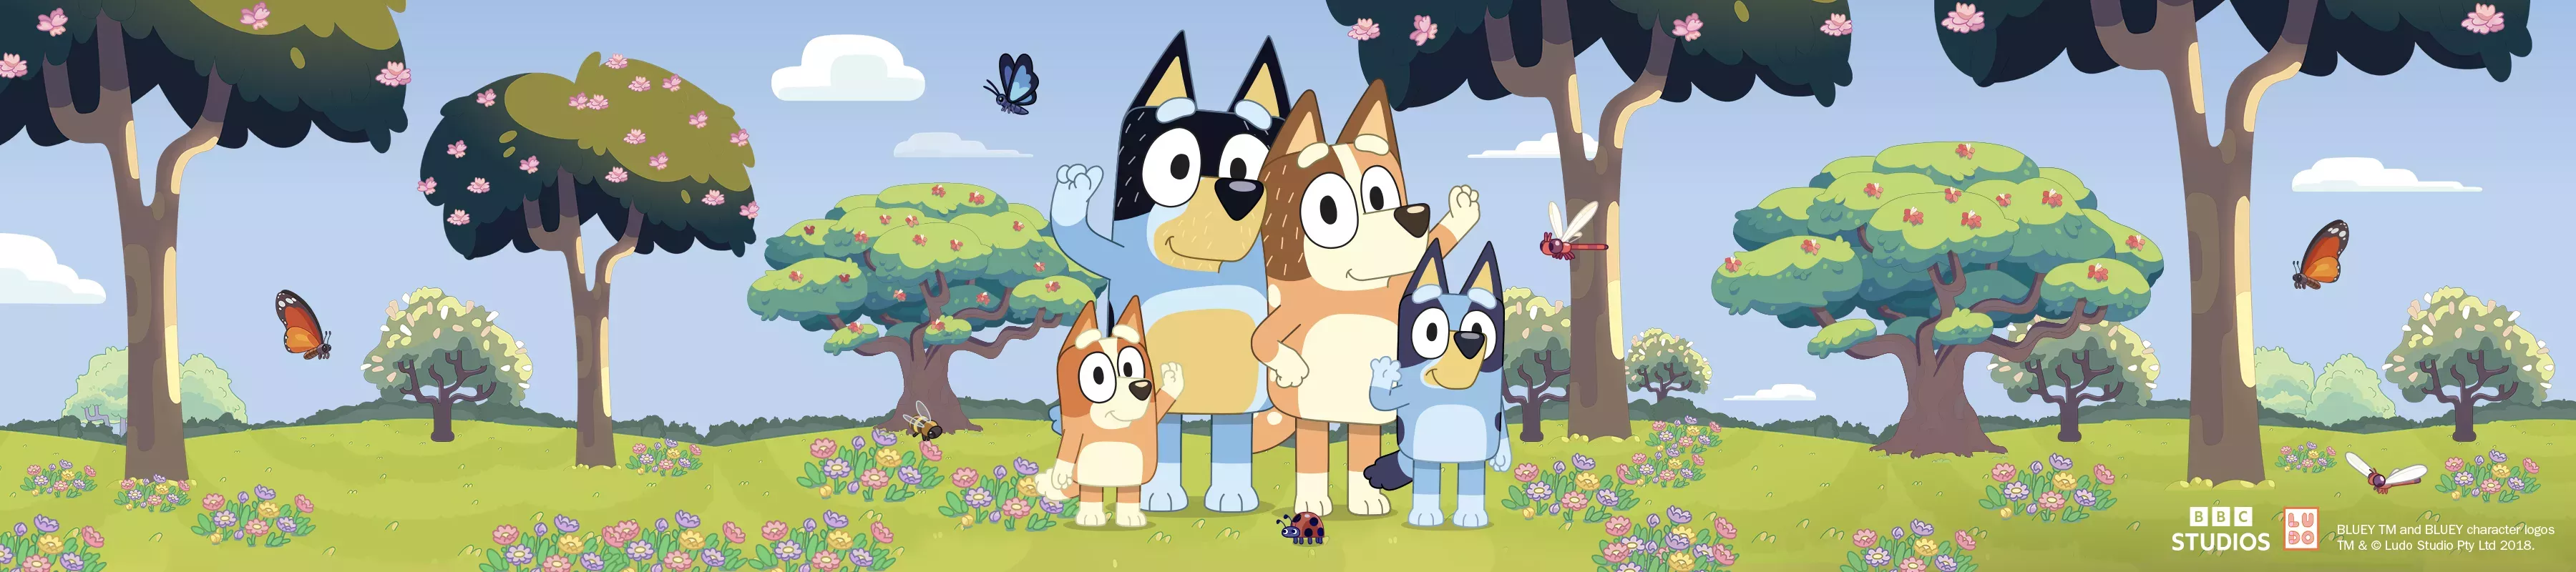 The bluey family on an illustrated background